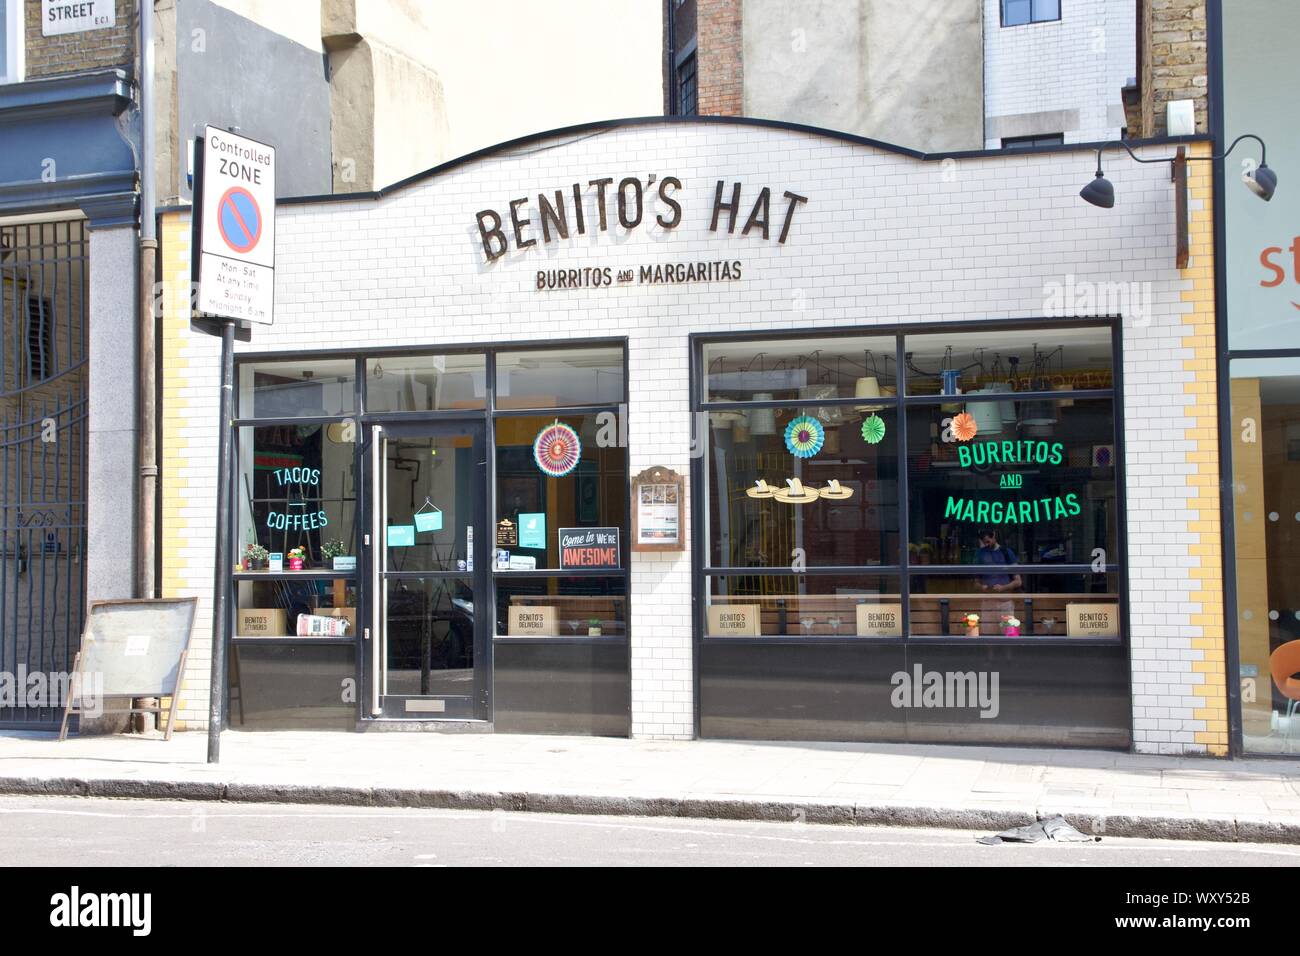 Benito's Hat is a high street Mexican restaurant in the UK Stock Photo